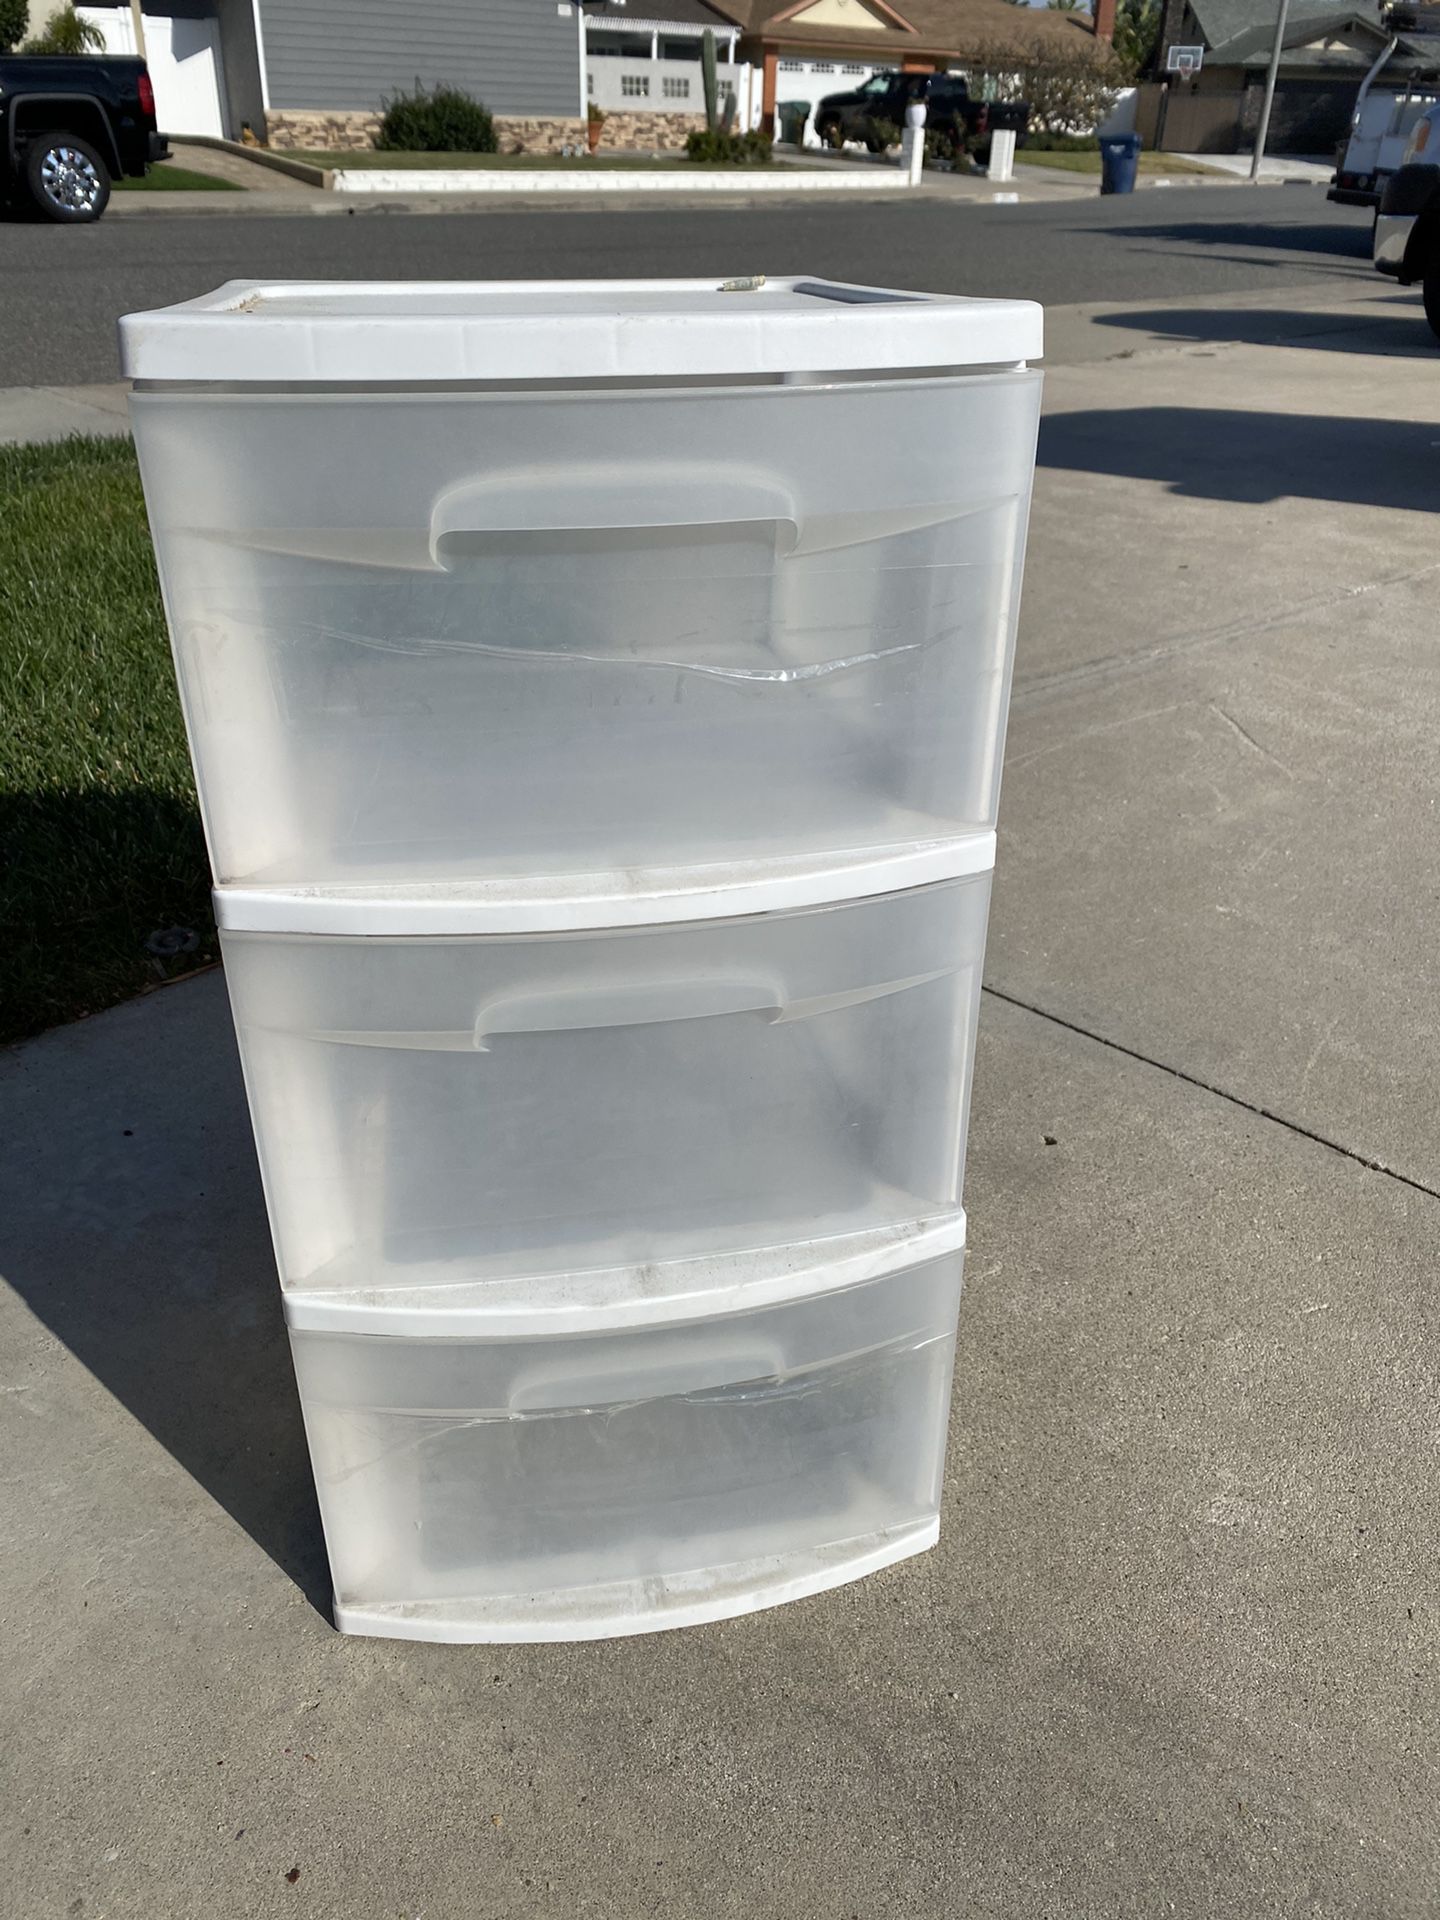 Two plastic storage containers with all three drawers